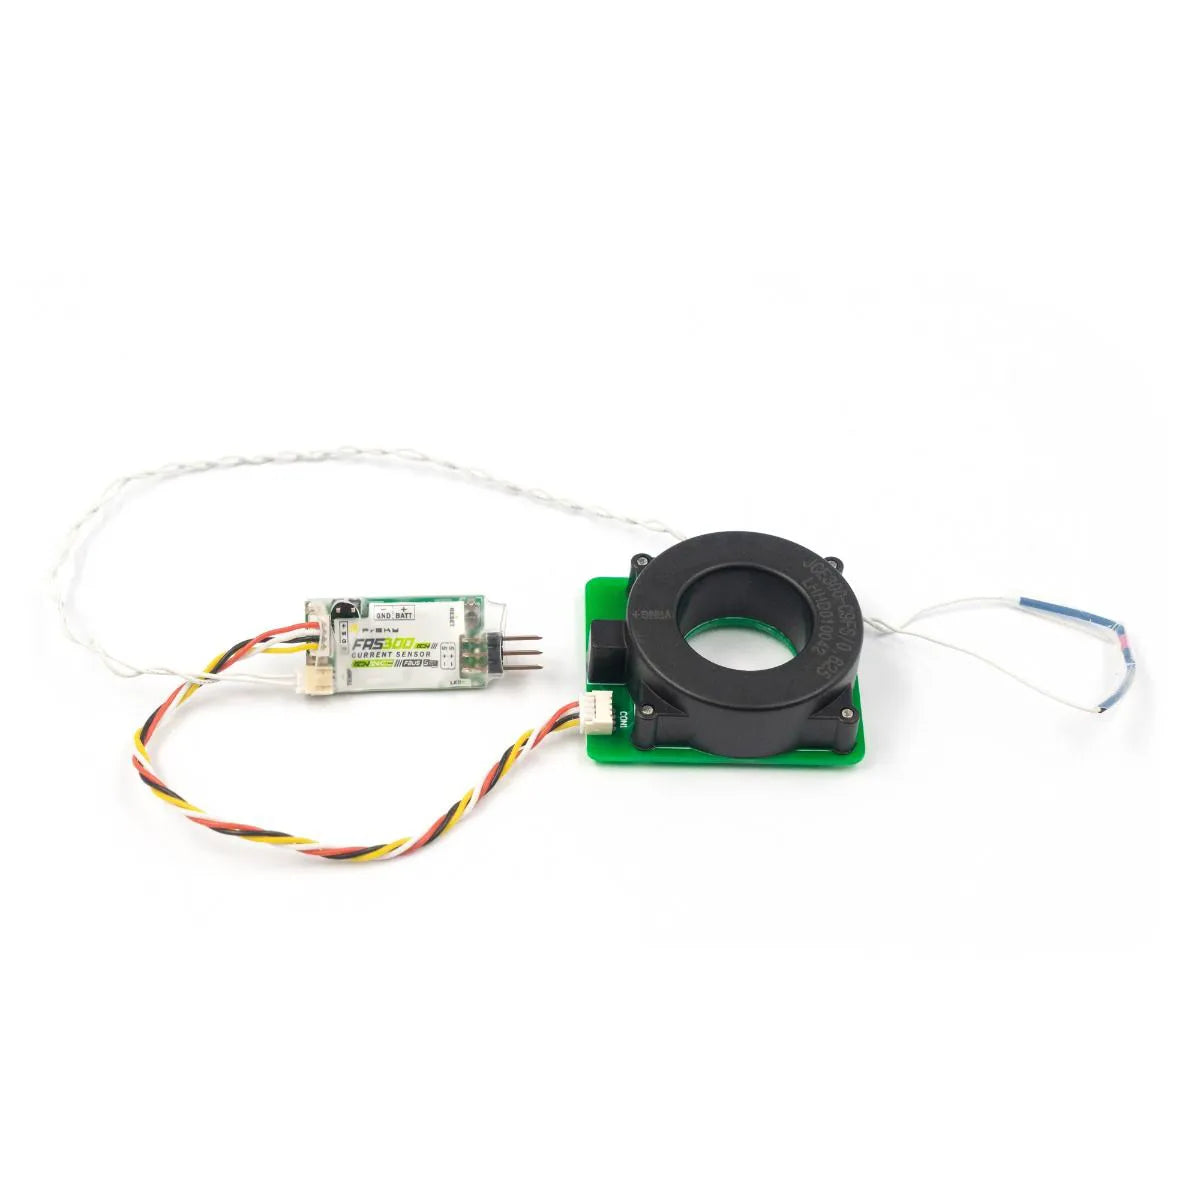 FrSky FAS300 ADV Current Sensor - Measure Current 0 - 300A Compatible With FBUS/S.Port Protocol